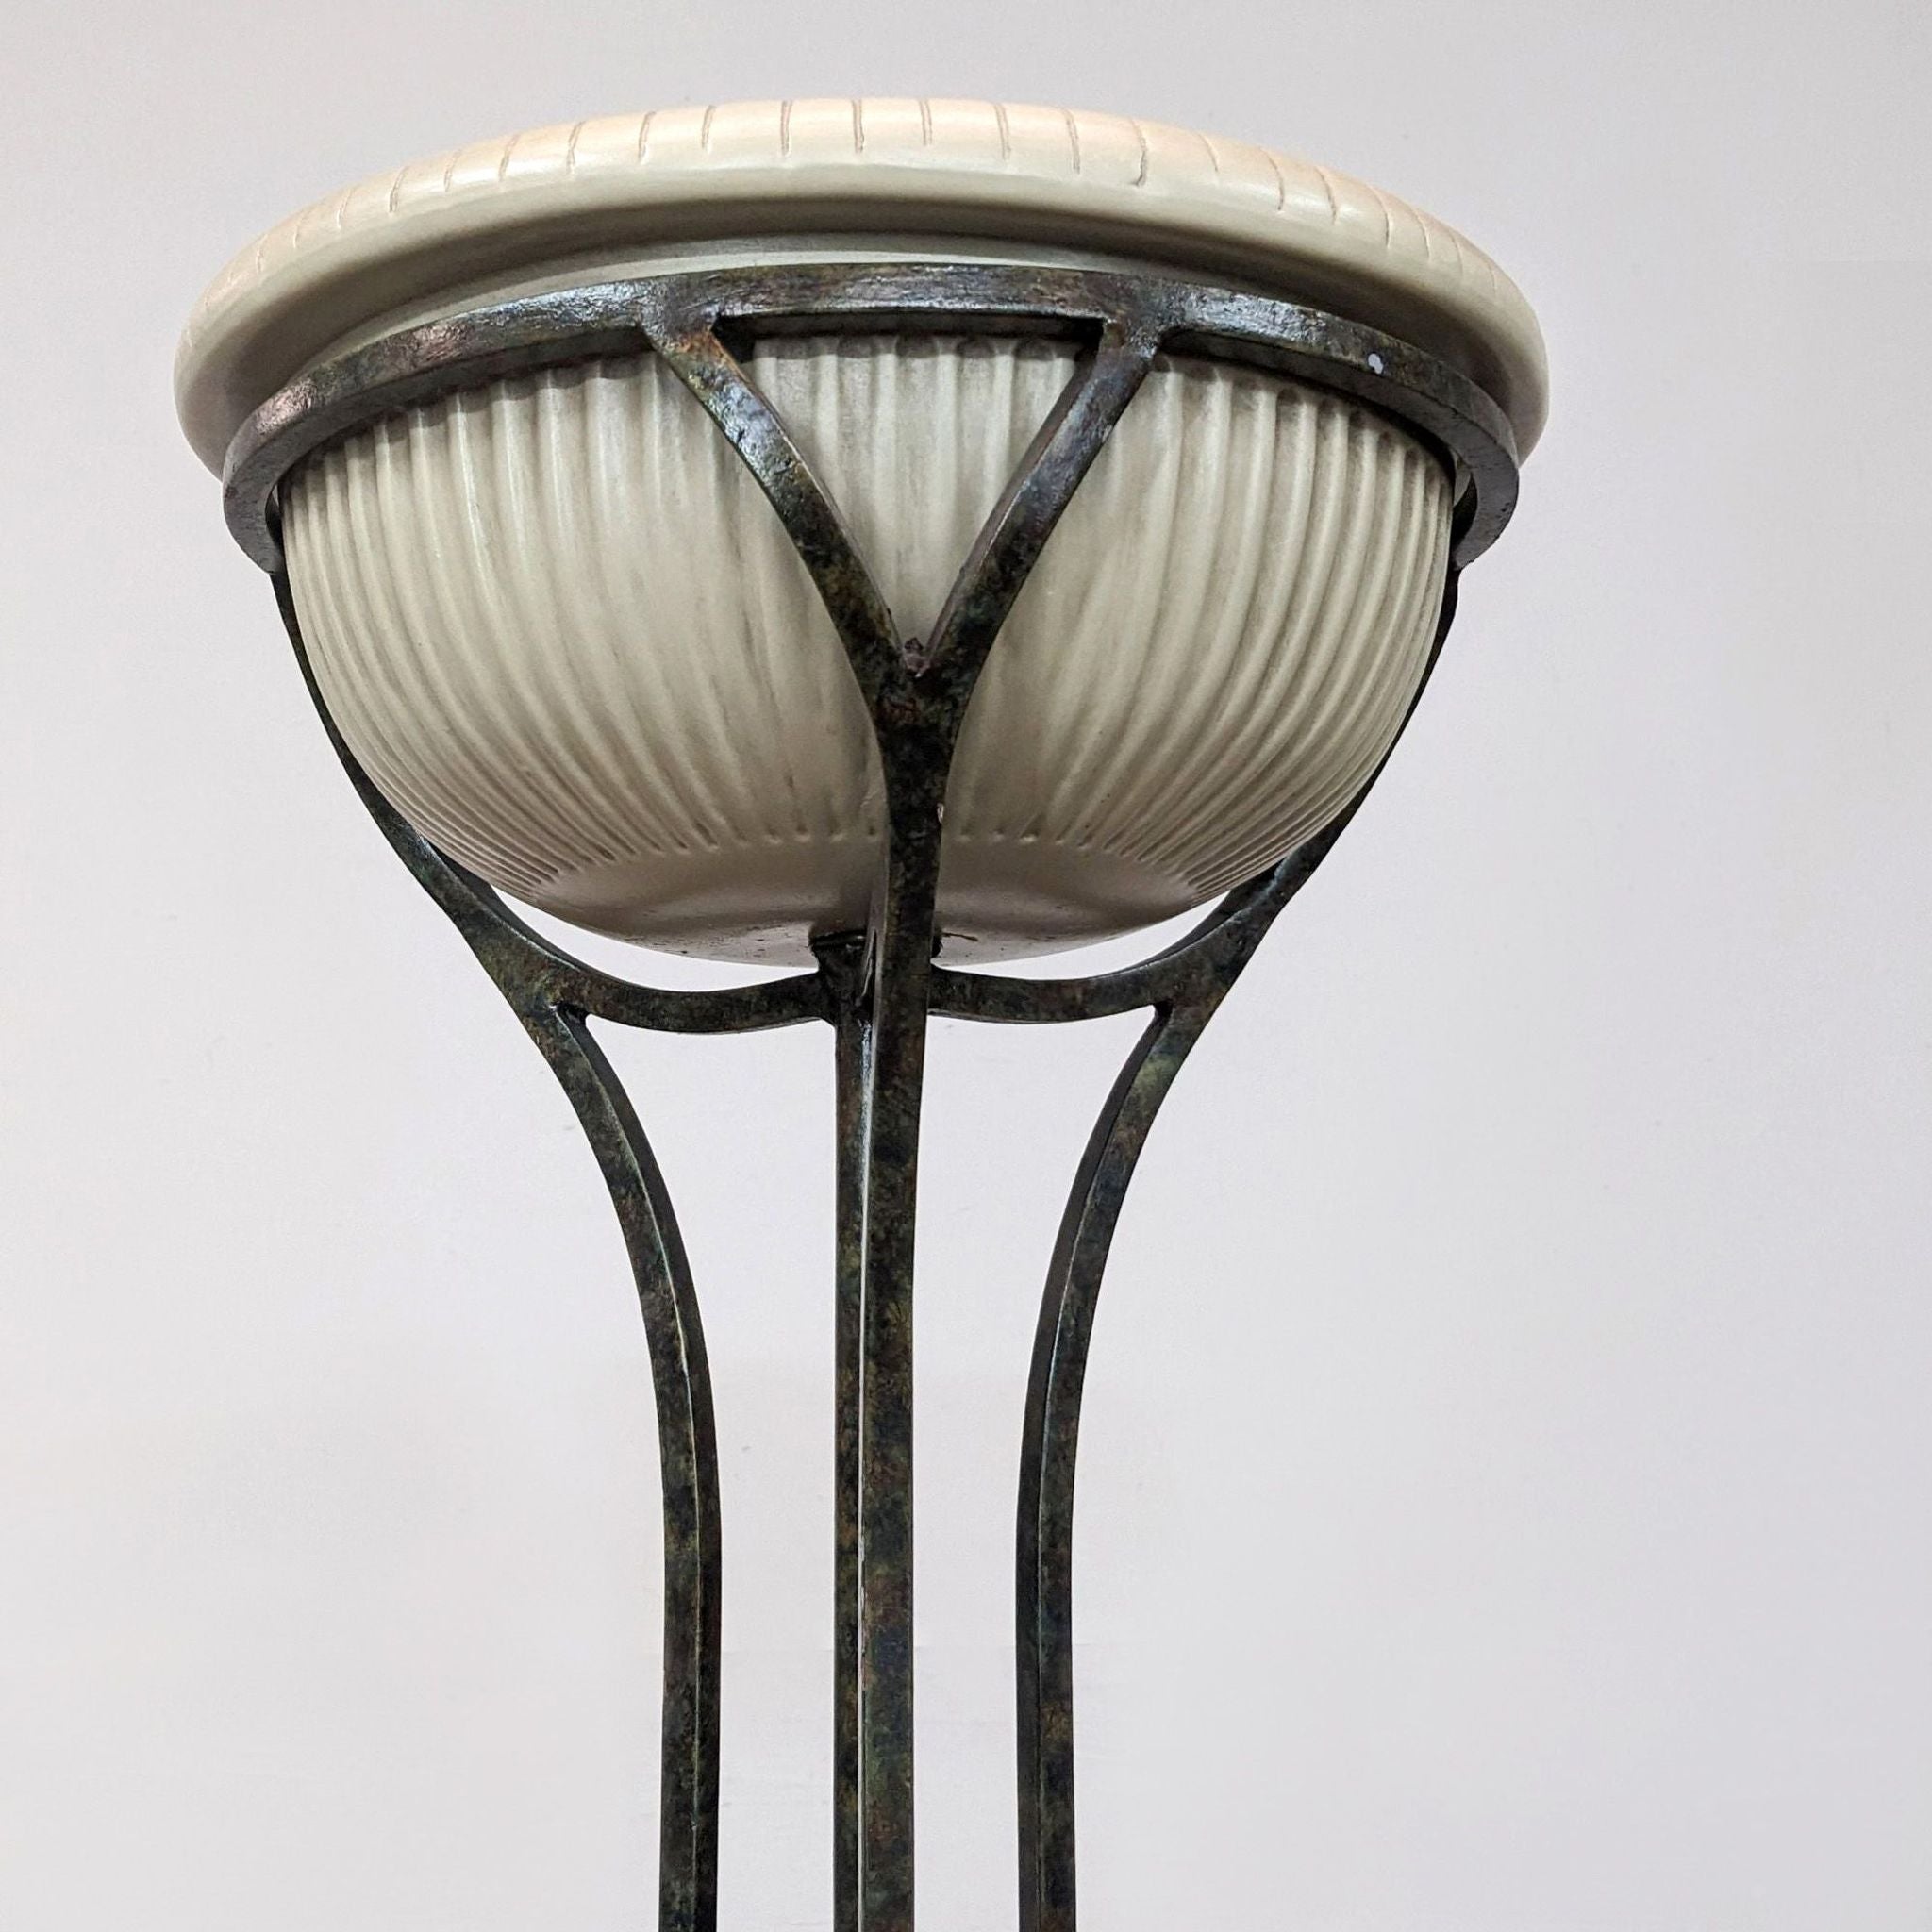 Alt text 2: Close-up of Reperch floor lamp head showing detailed iron frame and textured glass lampshade.